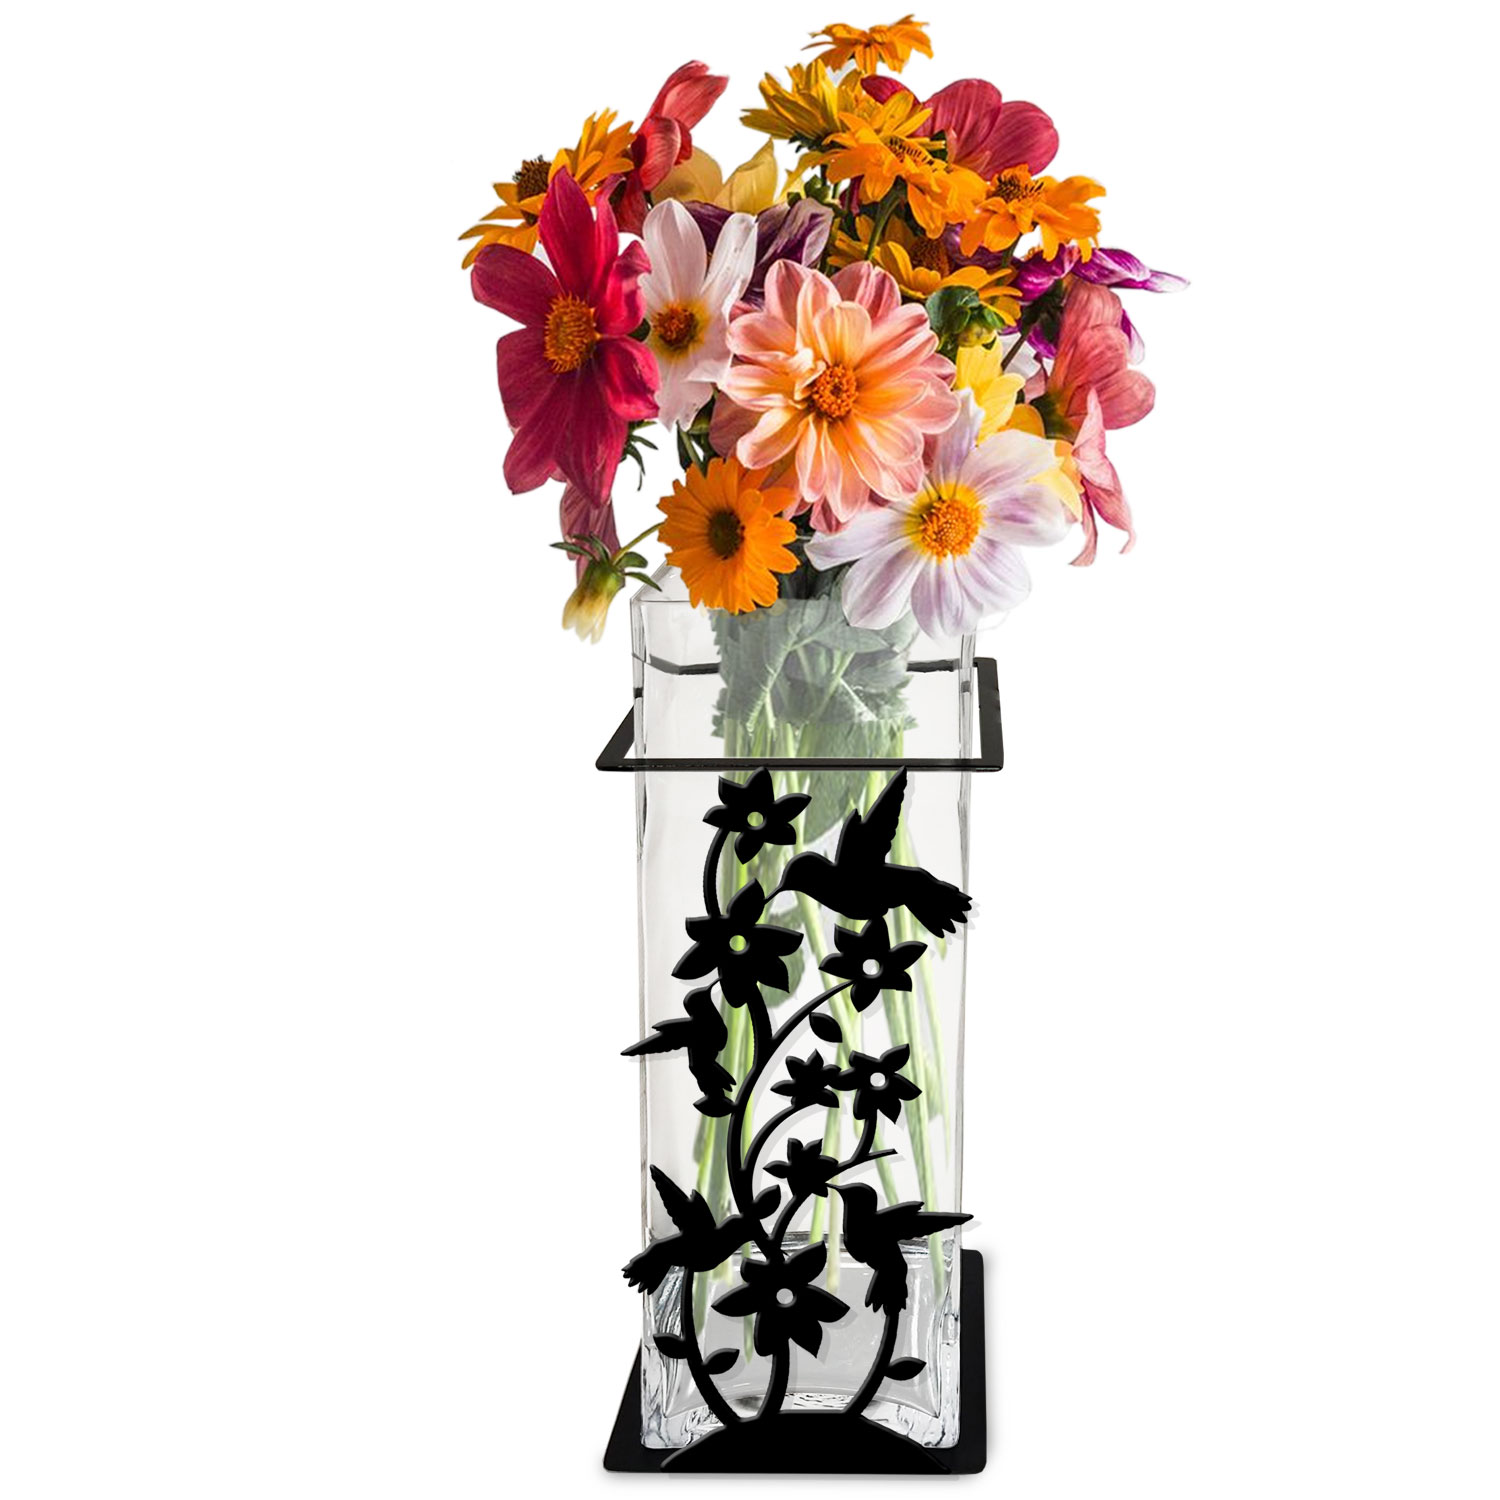 621506 - Hummingbirds 12in Tall Metal and Glass Square Vase